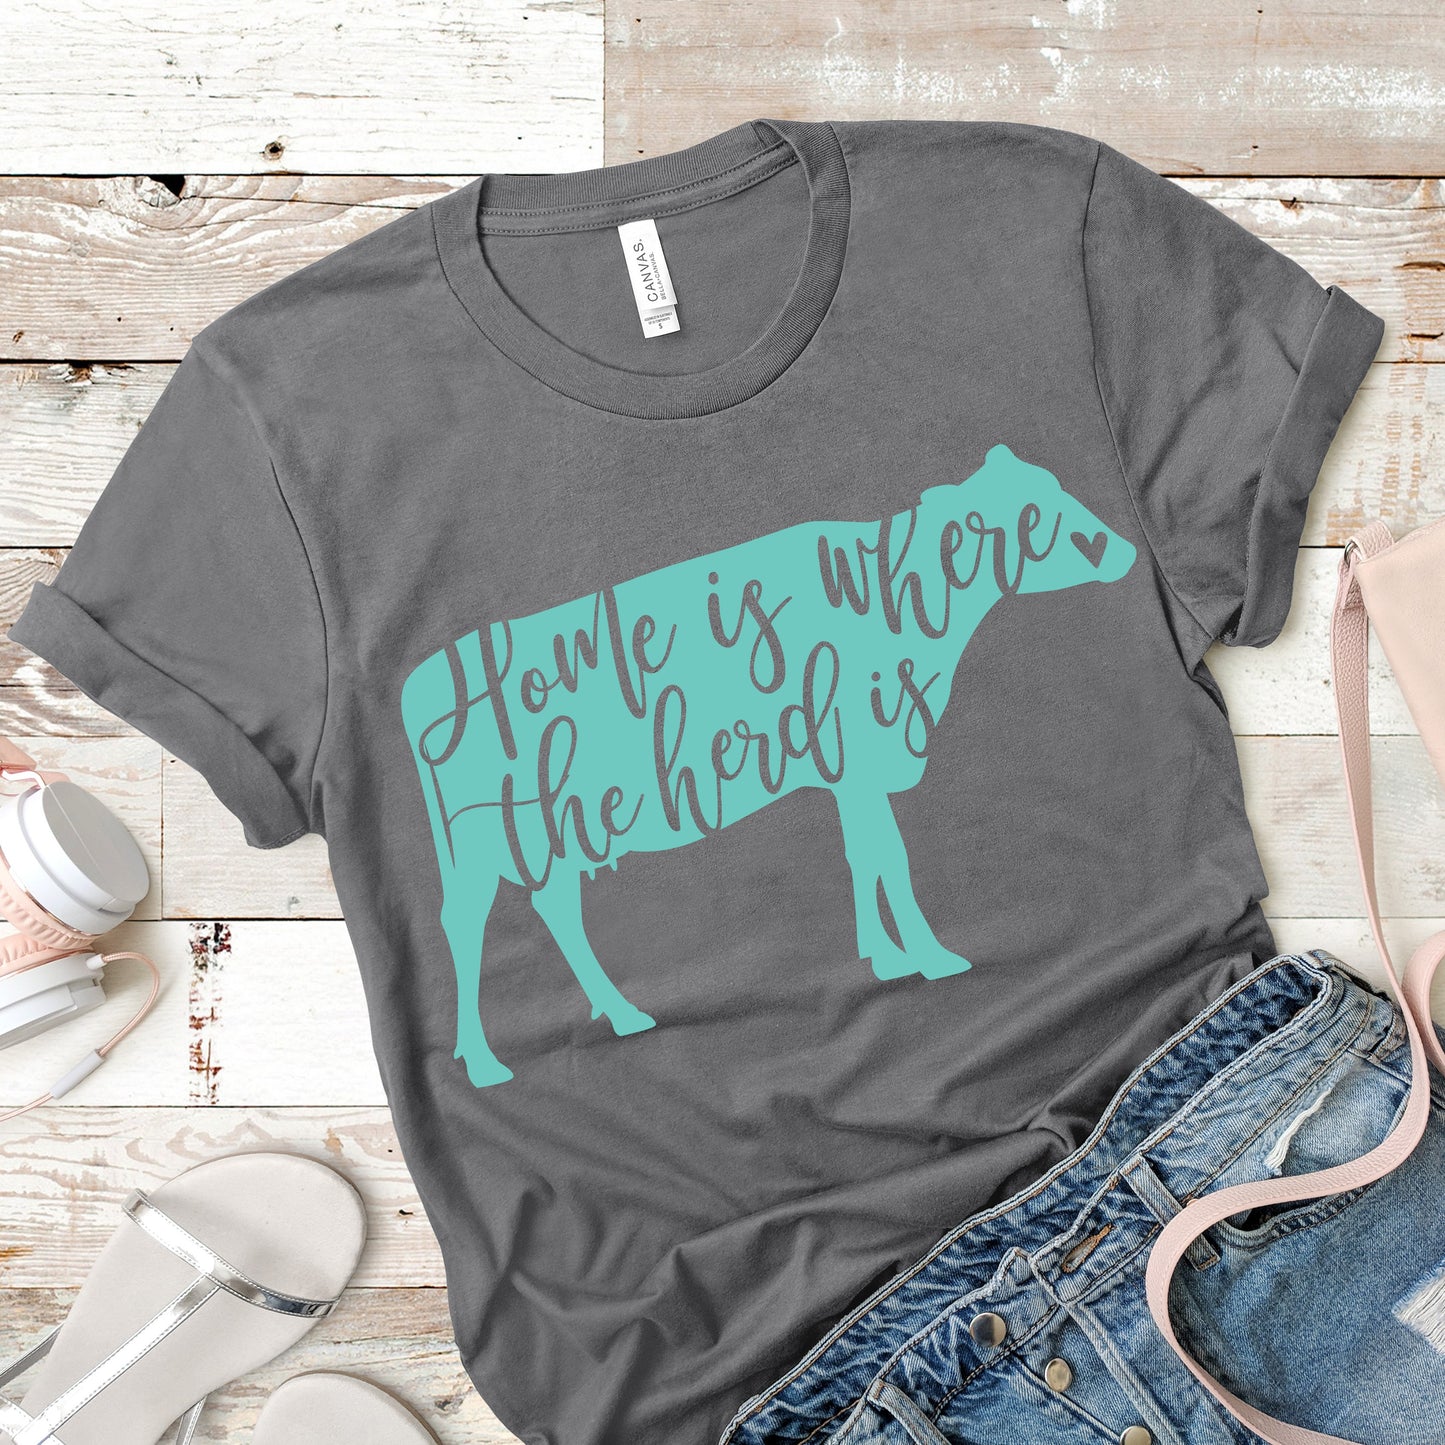 "Home is where the herd is" Tee